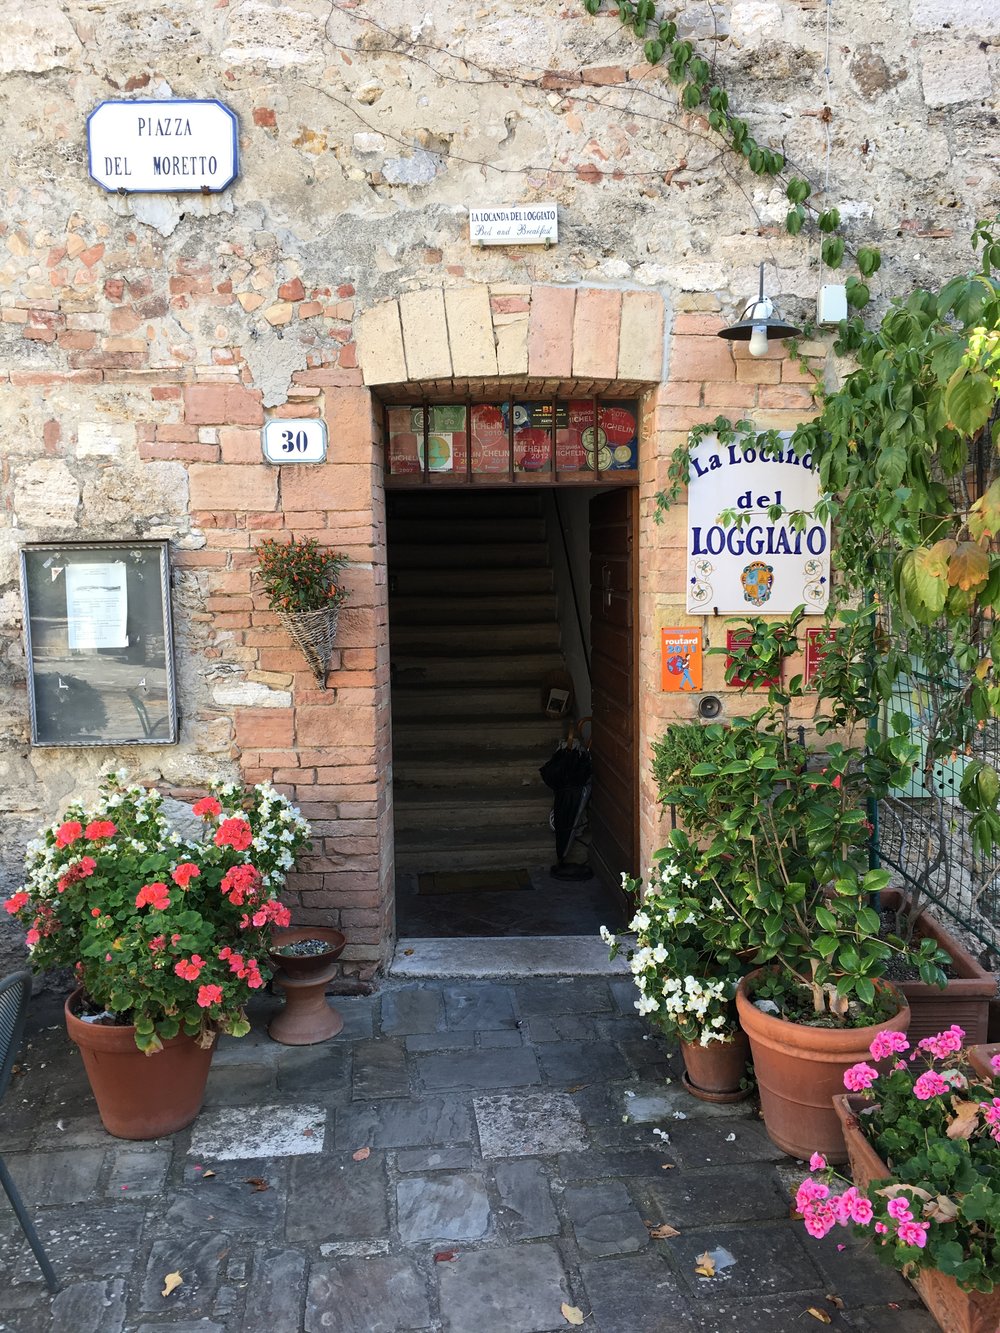 Bagno Vignoni- Our hotel was a pleasant surprise - great location and decor in this tiny hamlet